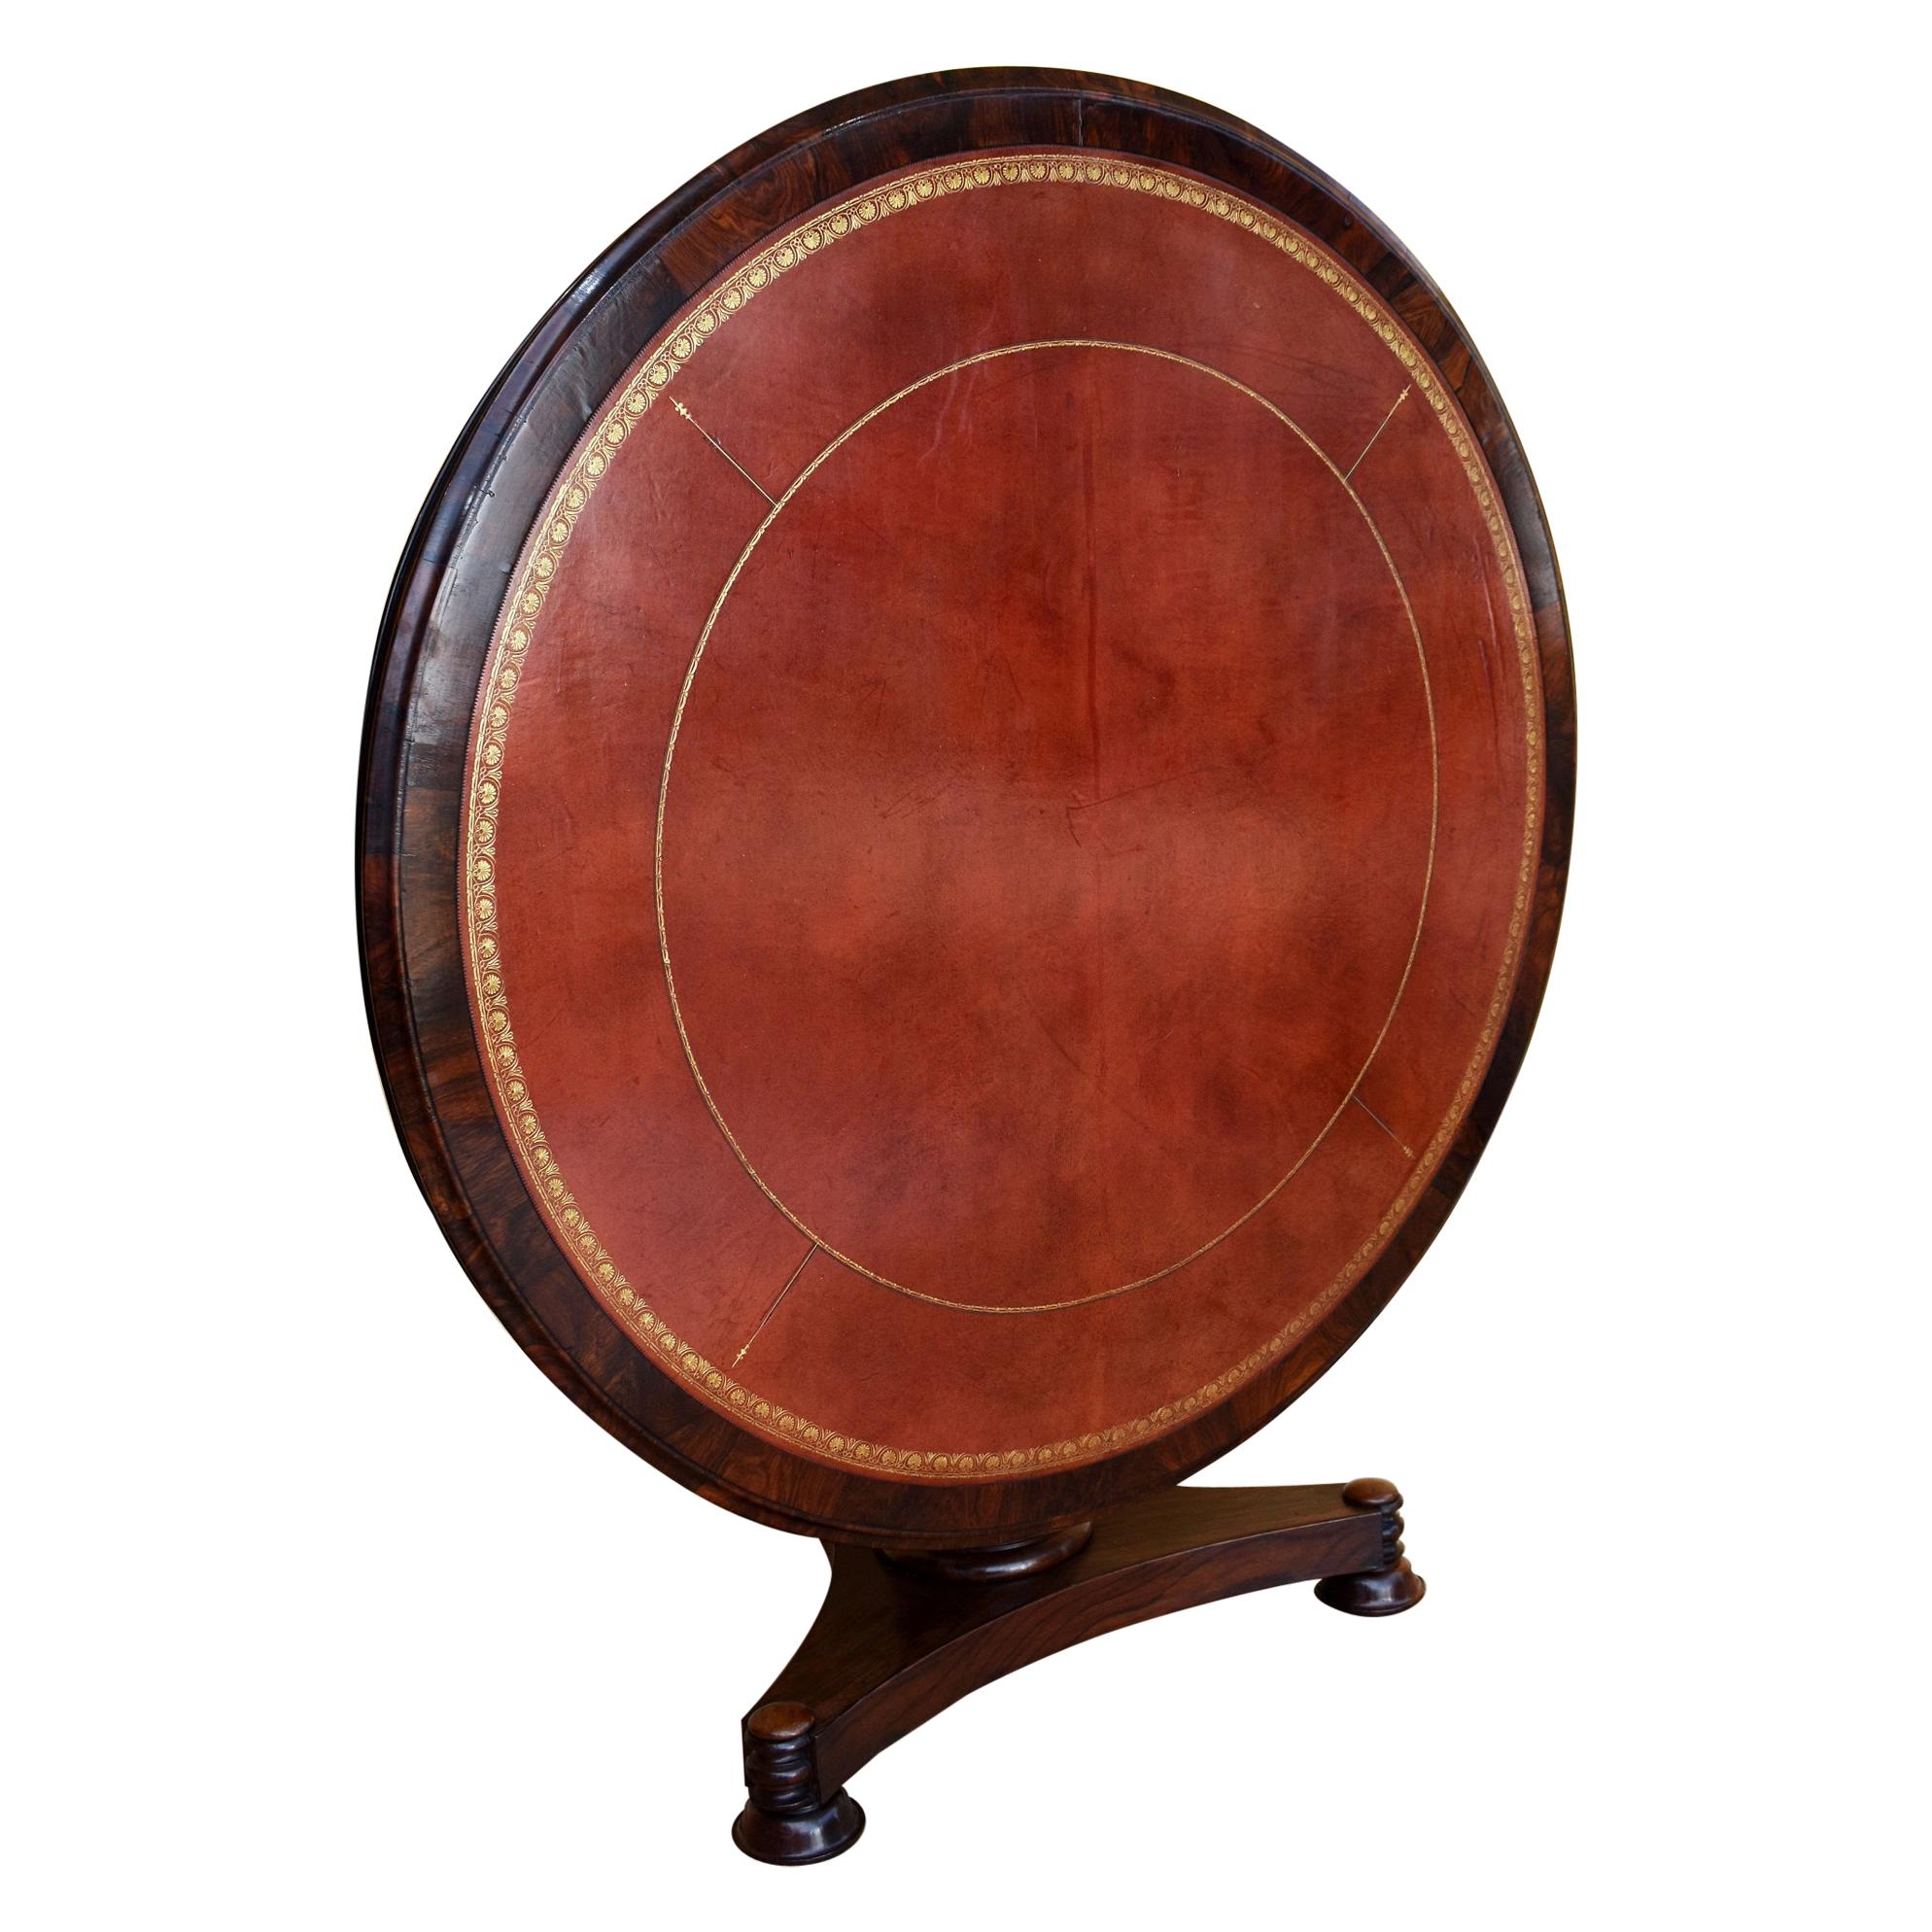 19th Century English William IV Rosewood Circular Library Table